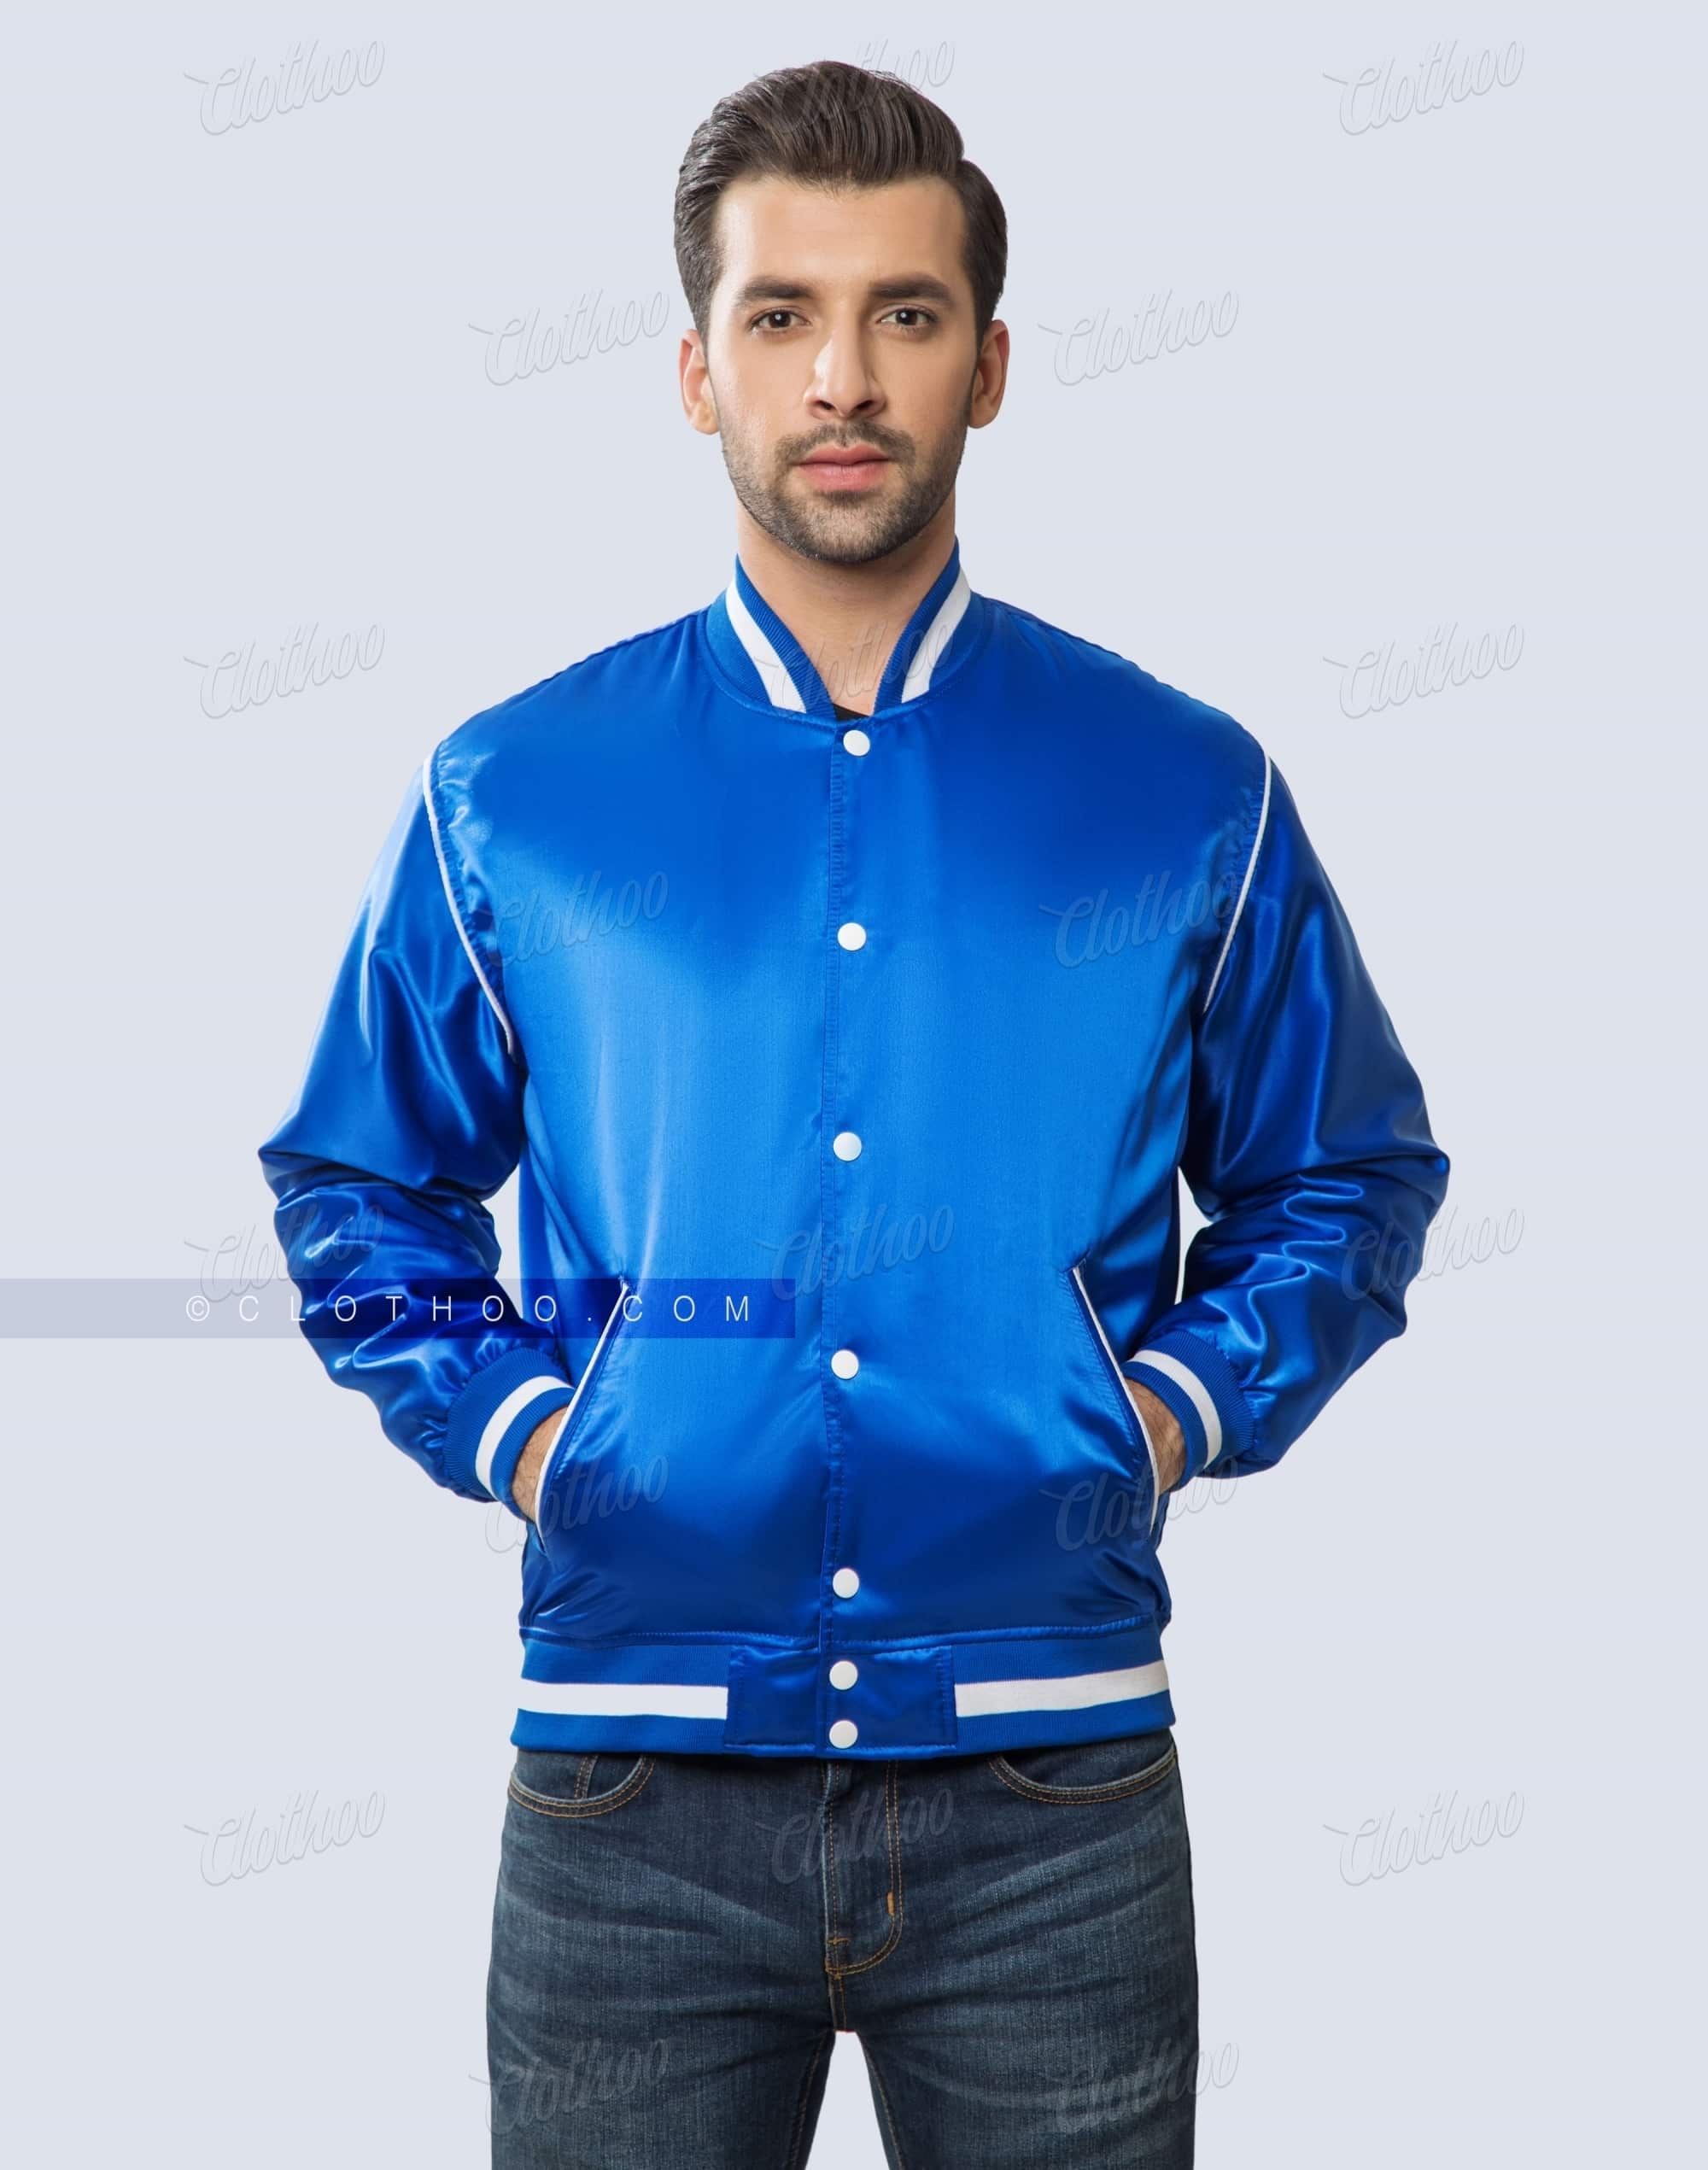 Satin Jacket with Piping for Mens & Women | Clothoo